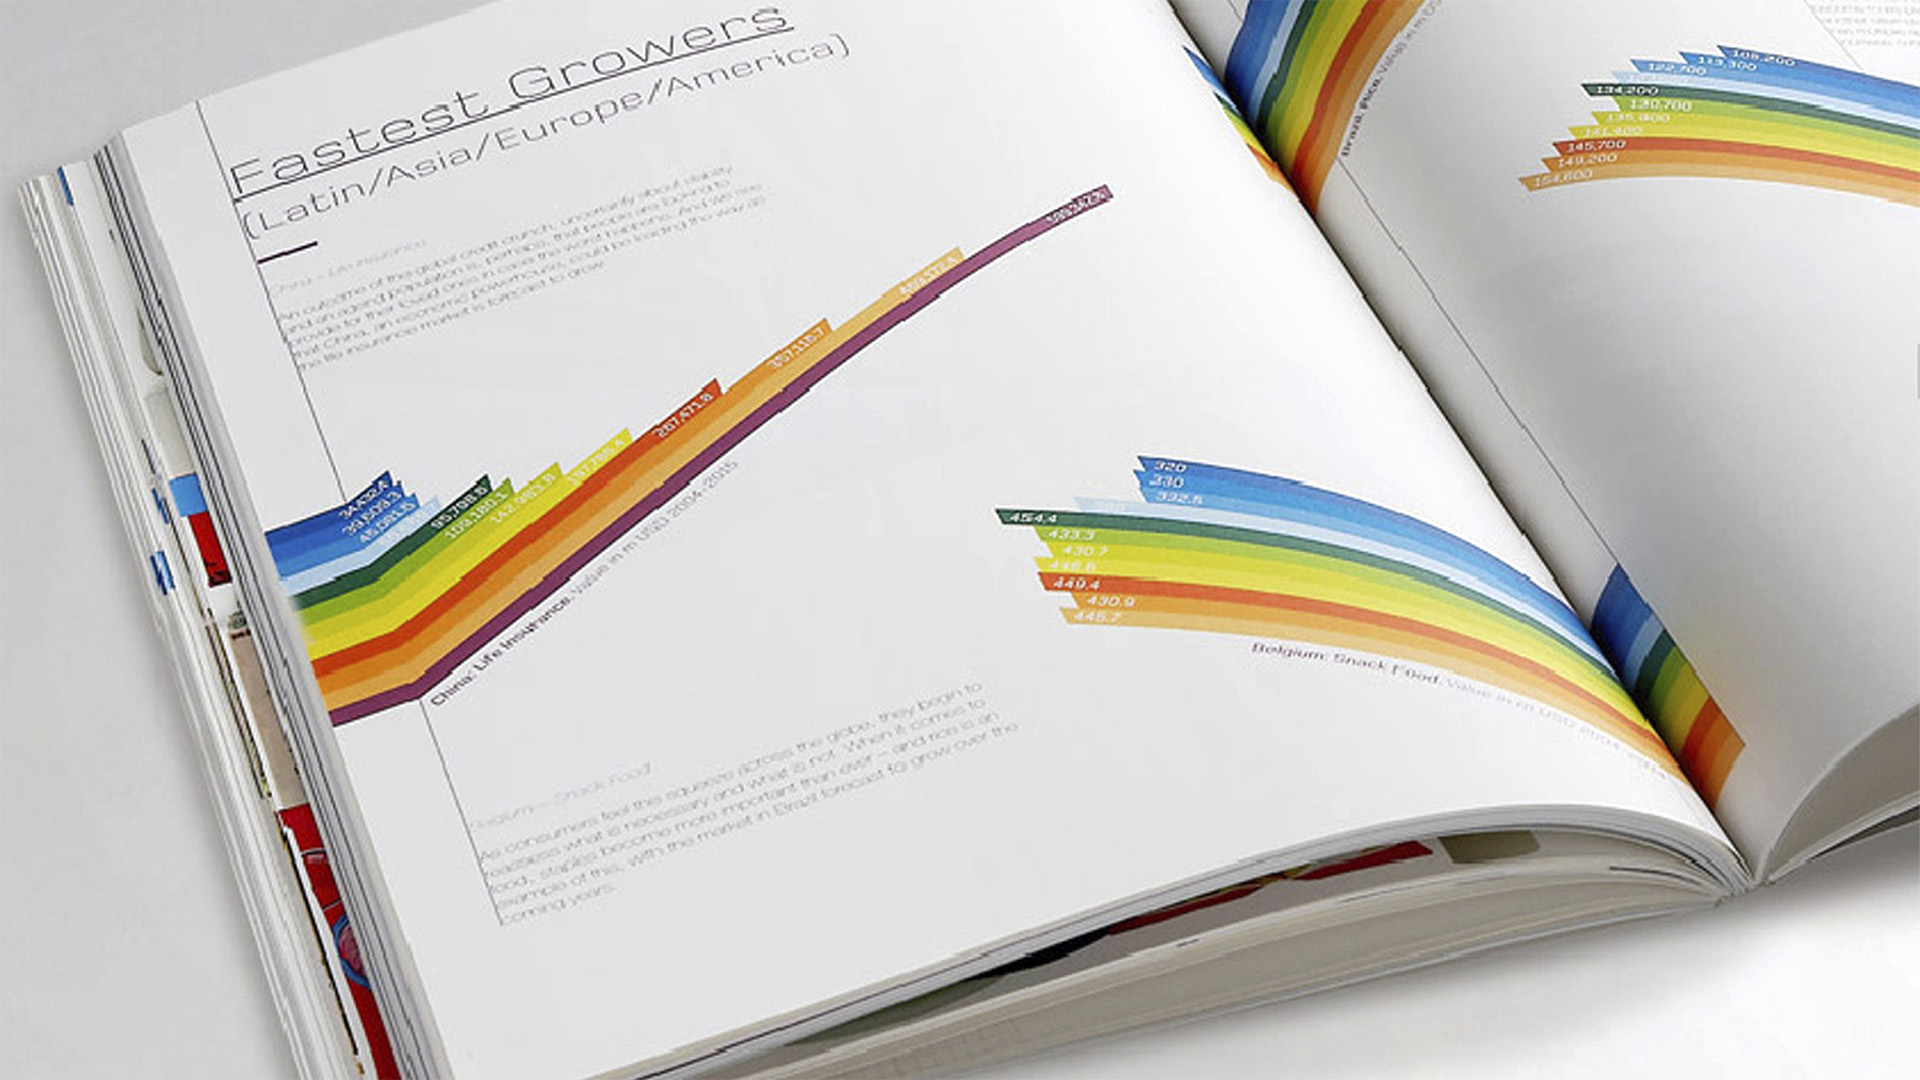 An open page displaying a colourful section of the Fastest Growers Graphic in the Mintel Loop Book